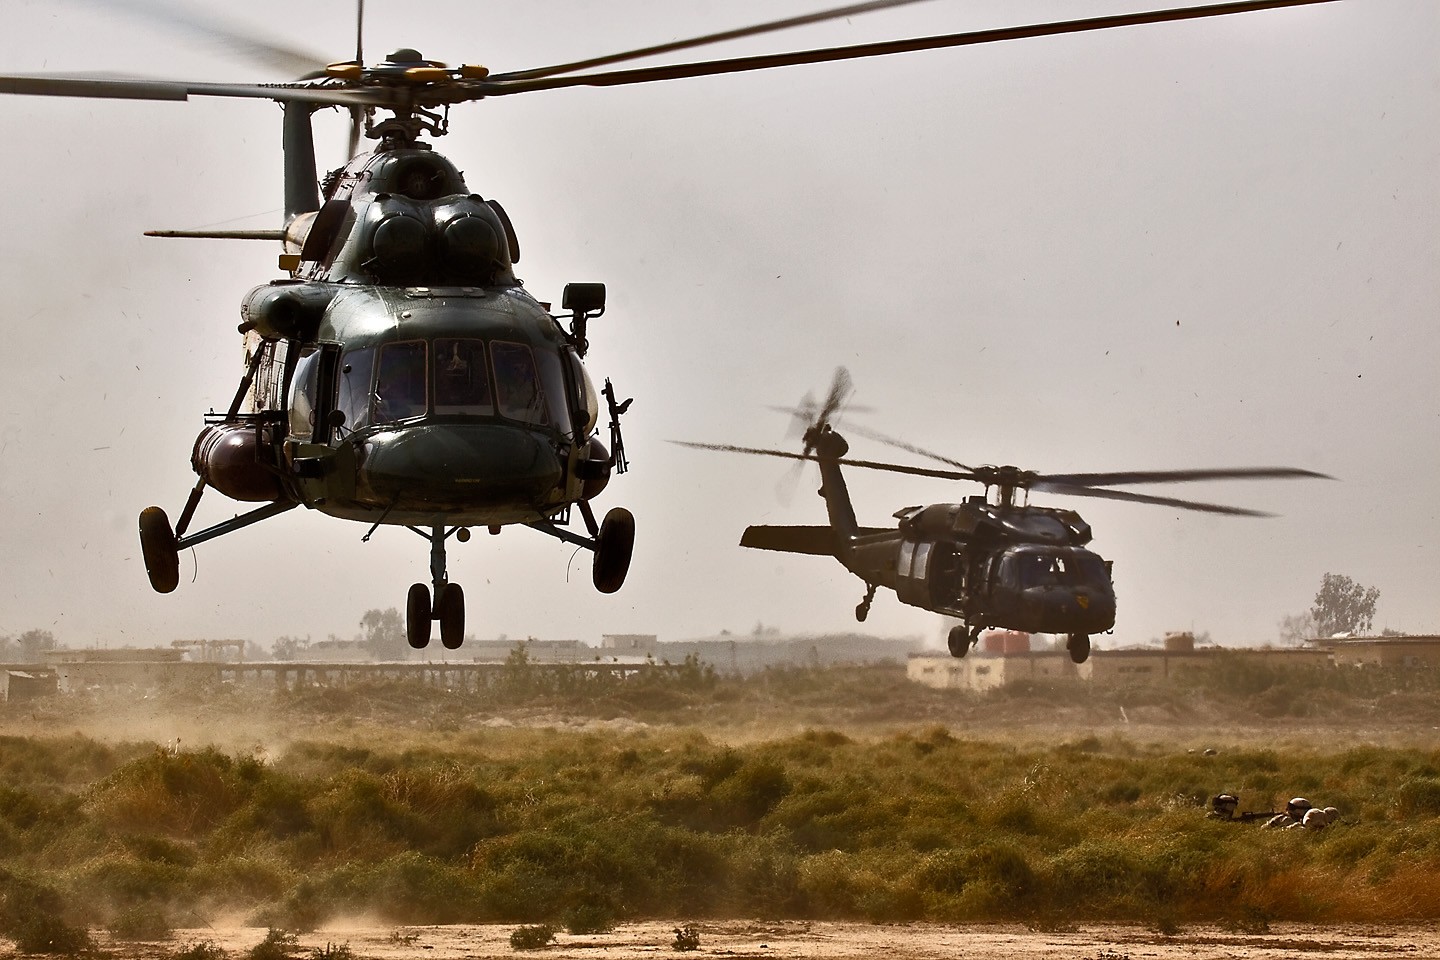 Afghanistan’s Black Hawks UH-60s are less capable than the old Mi-17